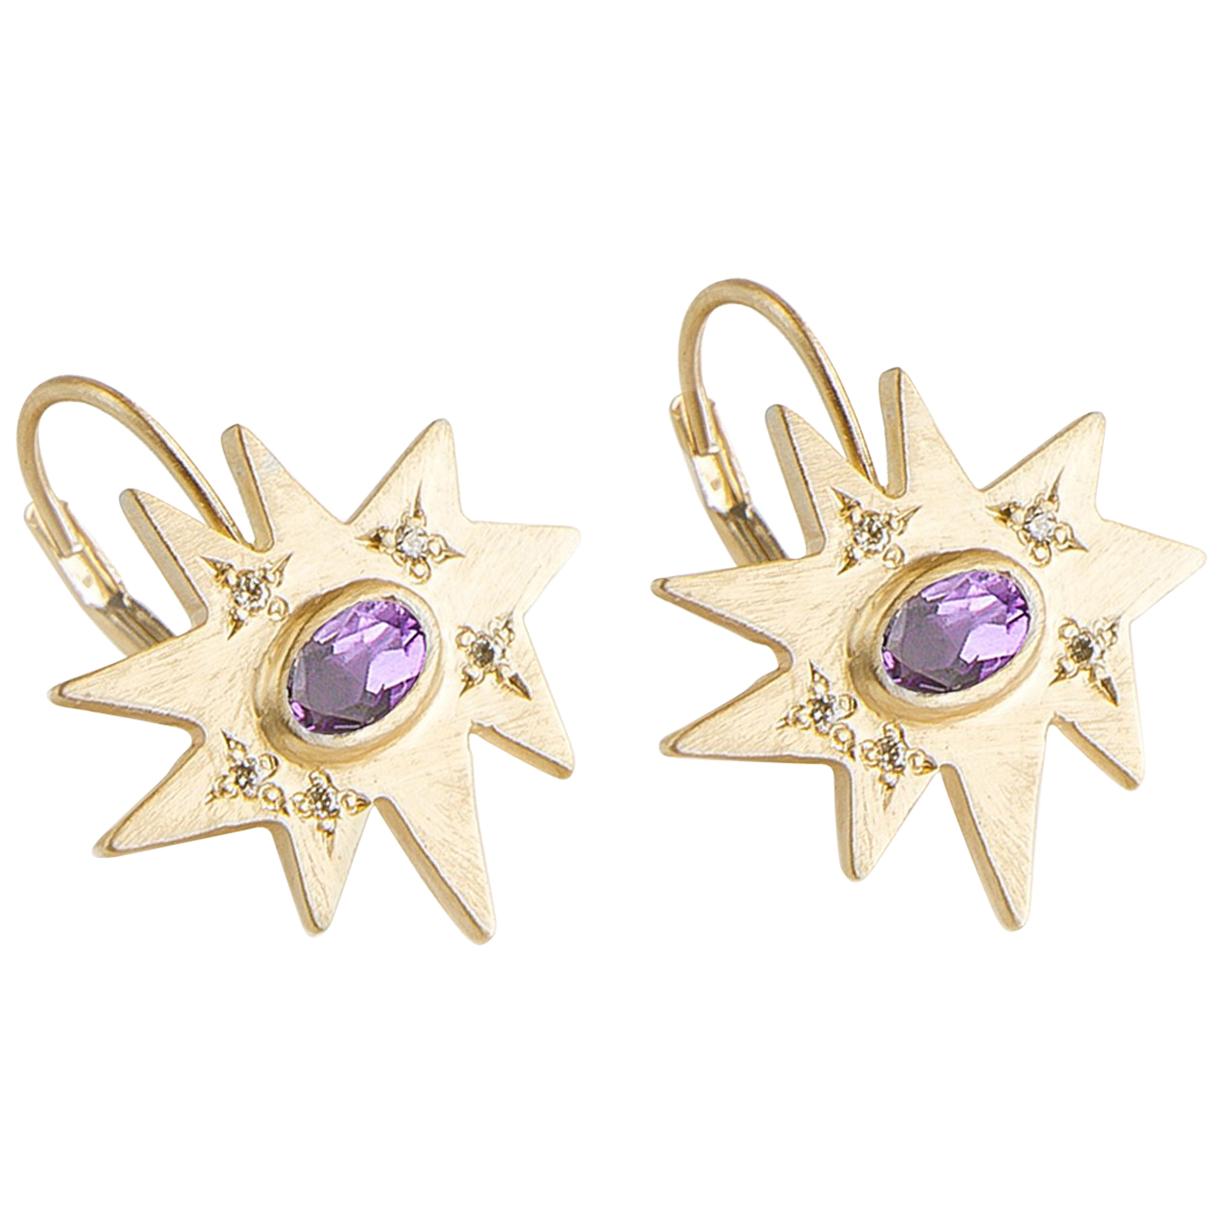 The perfect drop for any occasion. Our iconic matte gold organic shape Stellina star is affixed to a lever back hook. Featuring our signature diamond dusting and stunning amethyst centers, these earrings are full of sparkle.

KAPOW! The Stella